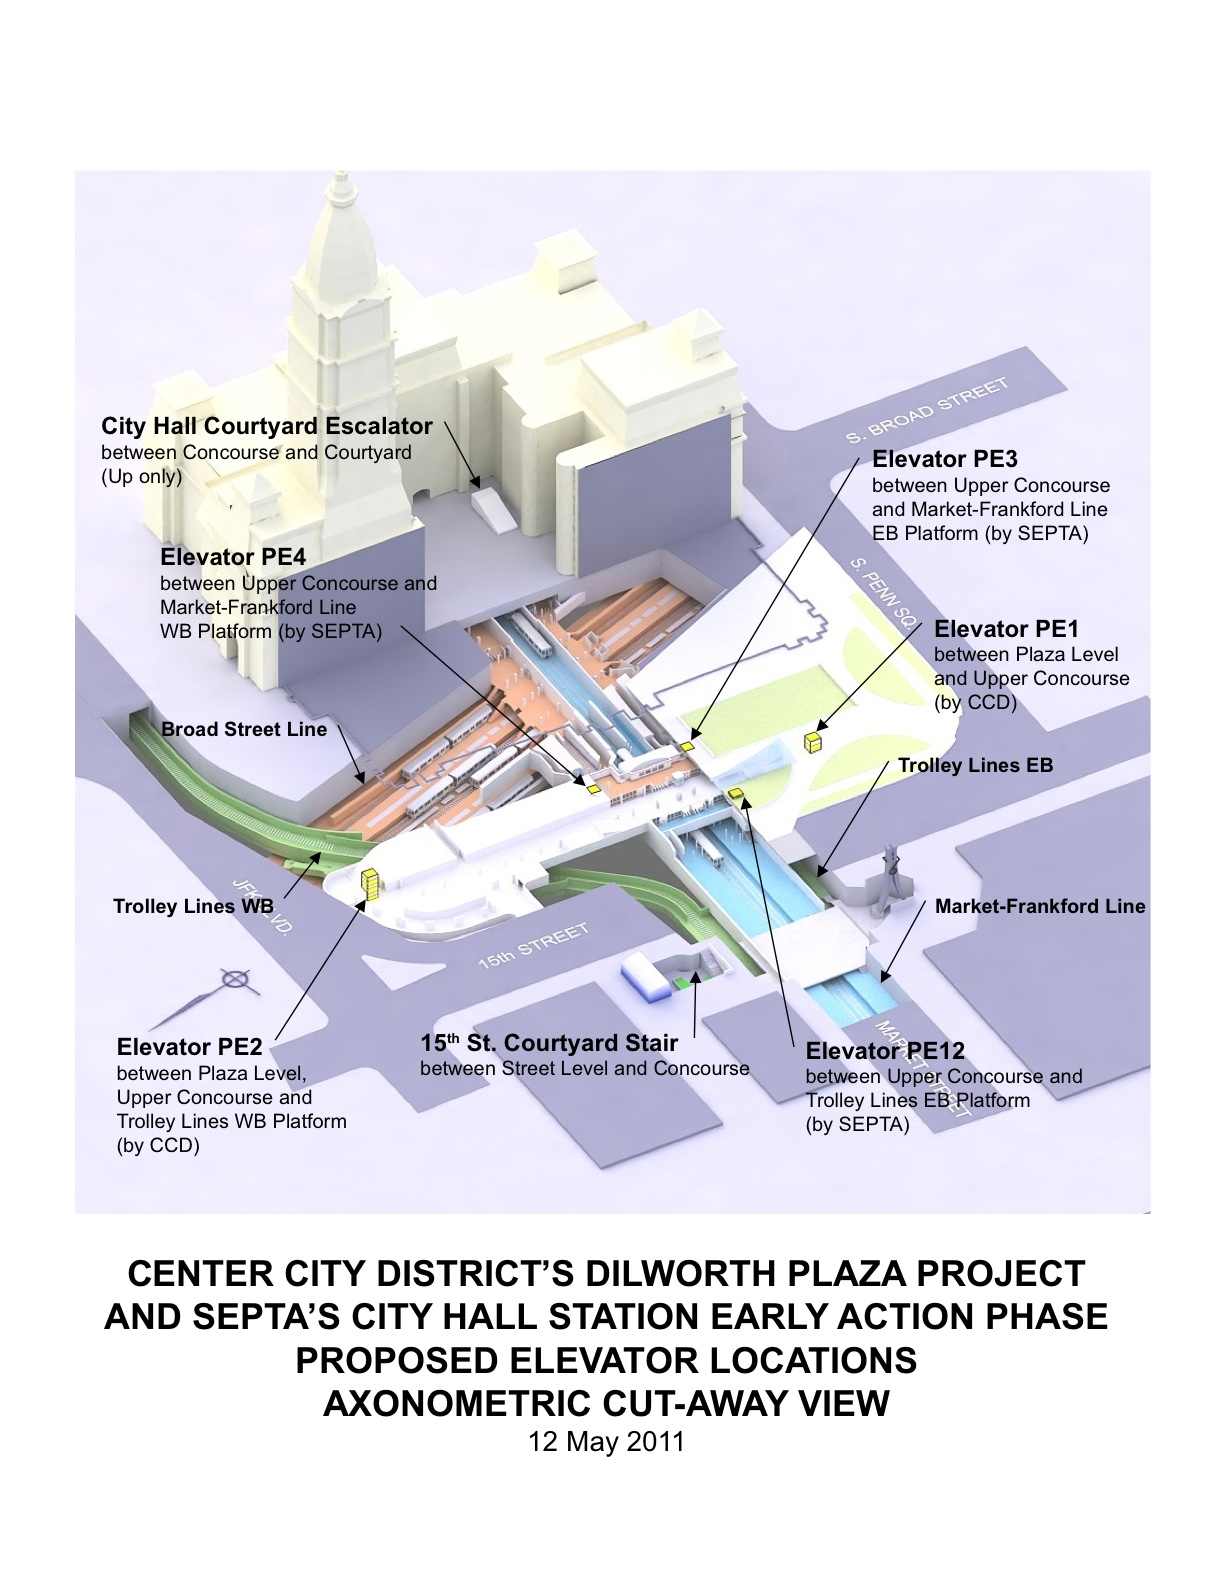 A schematic of SEPTA's project underneath Dilworth Plaza, including new elevators provided for in the agreement.